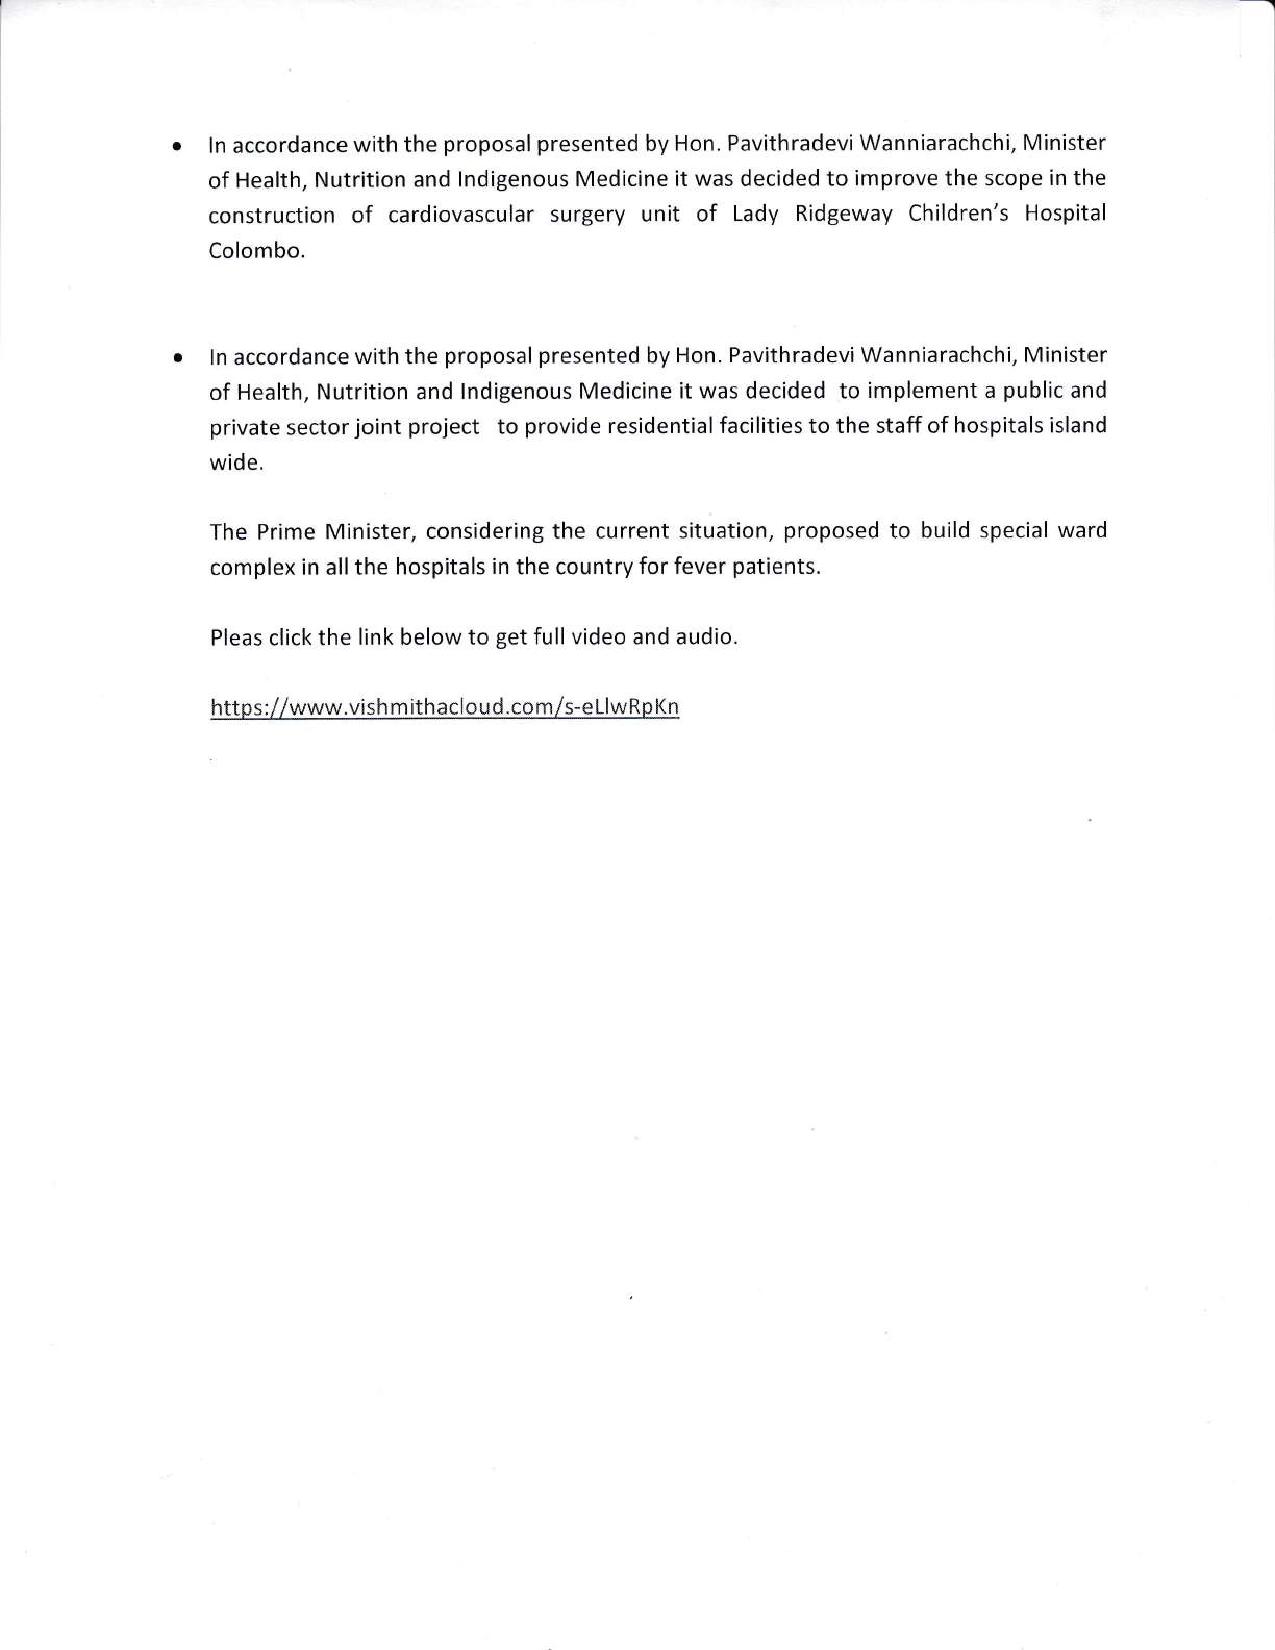 Cabinet Decisions 20.05.2020English compressed page 003